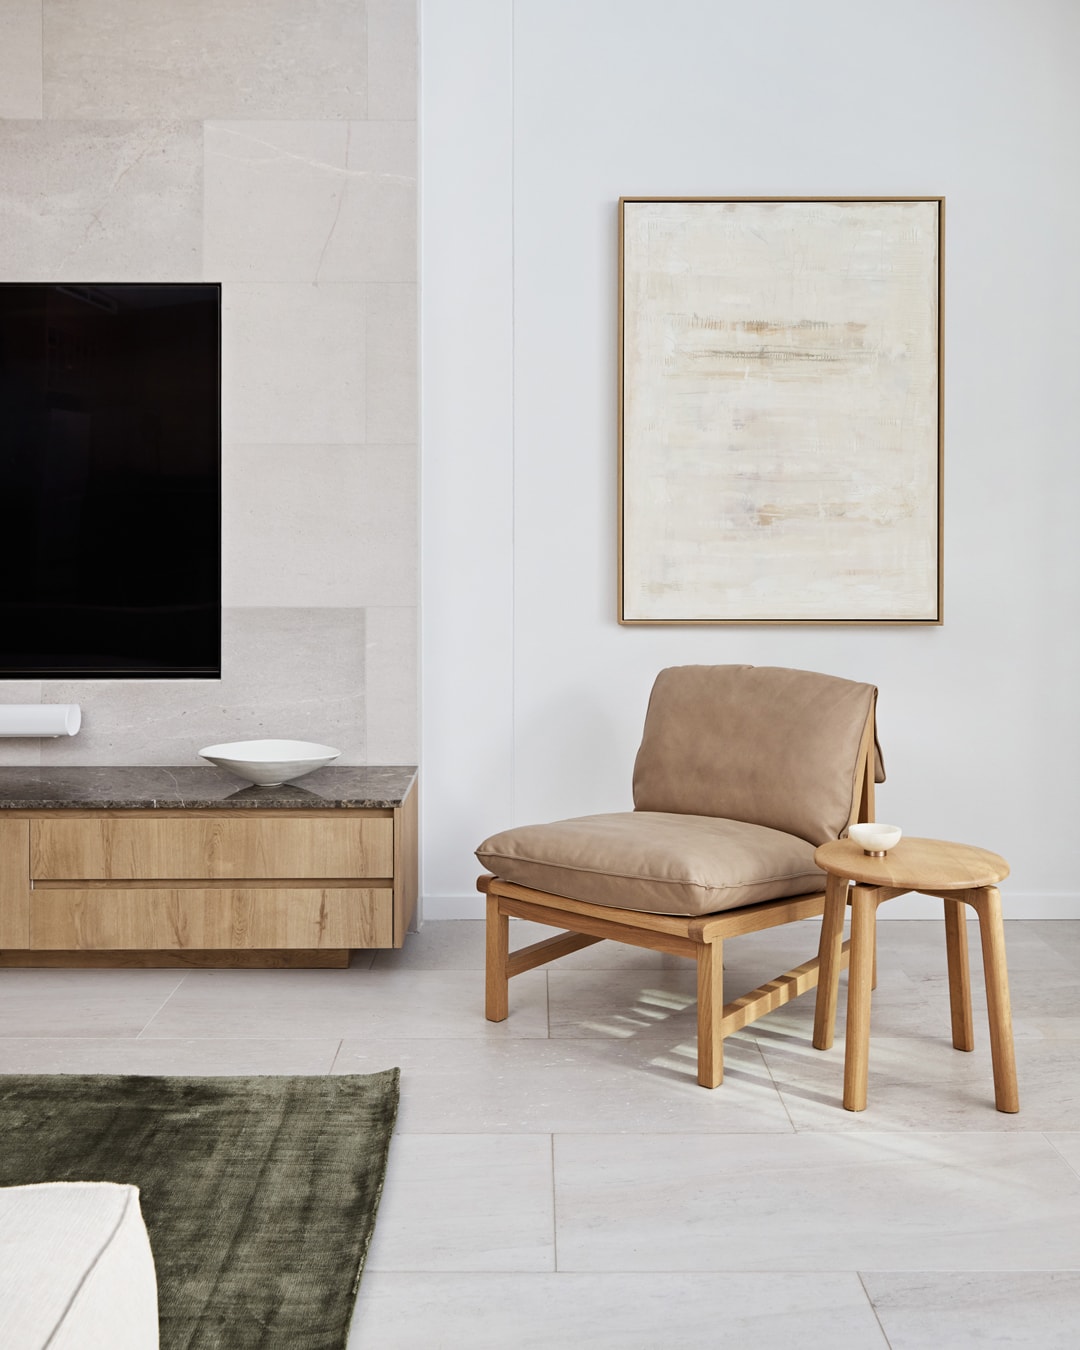 Vaucluse Project Living Room - RMS Natural Stone and Ceramics